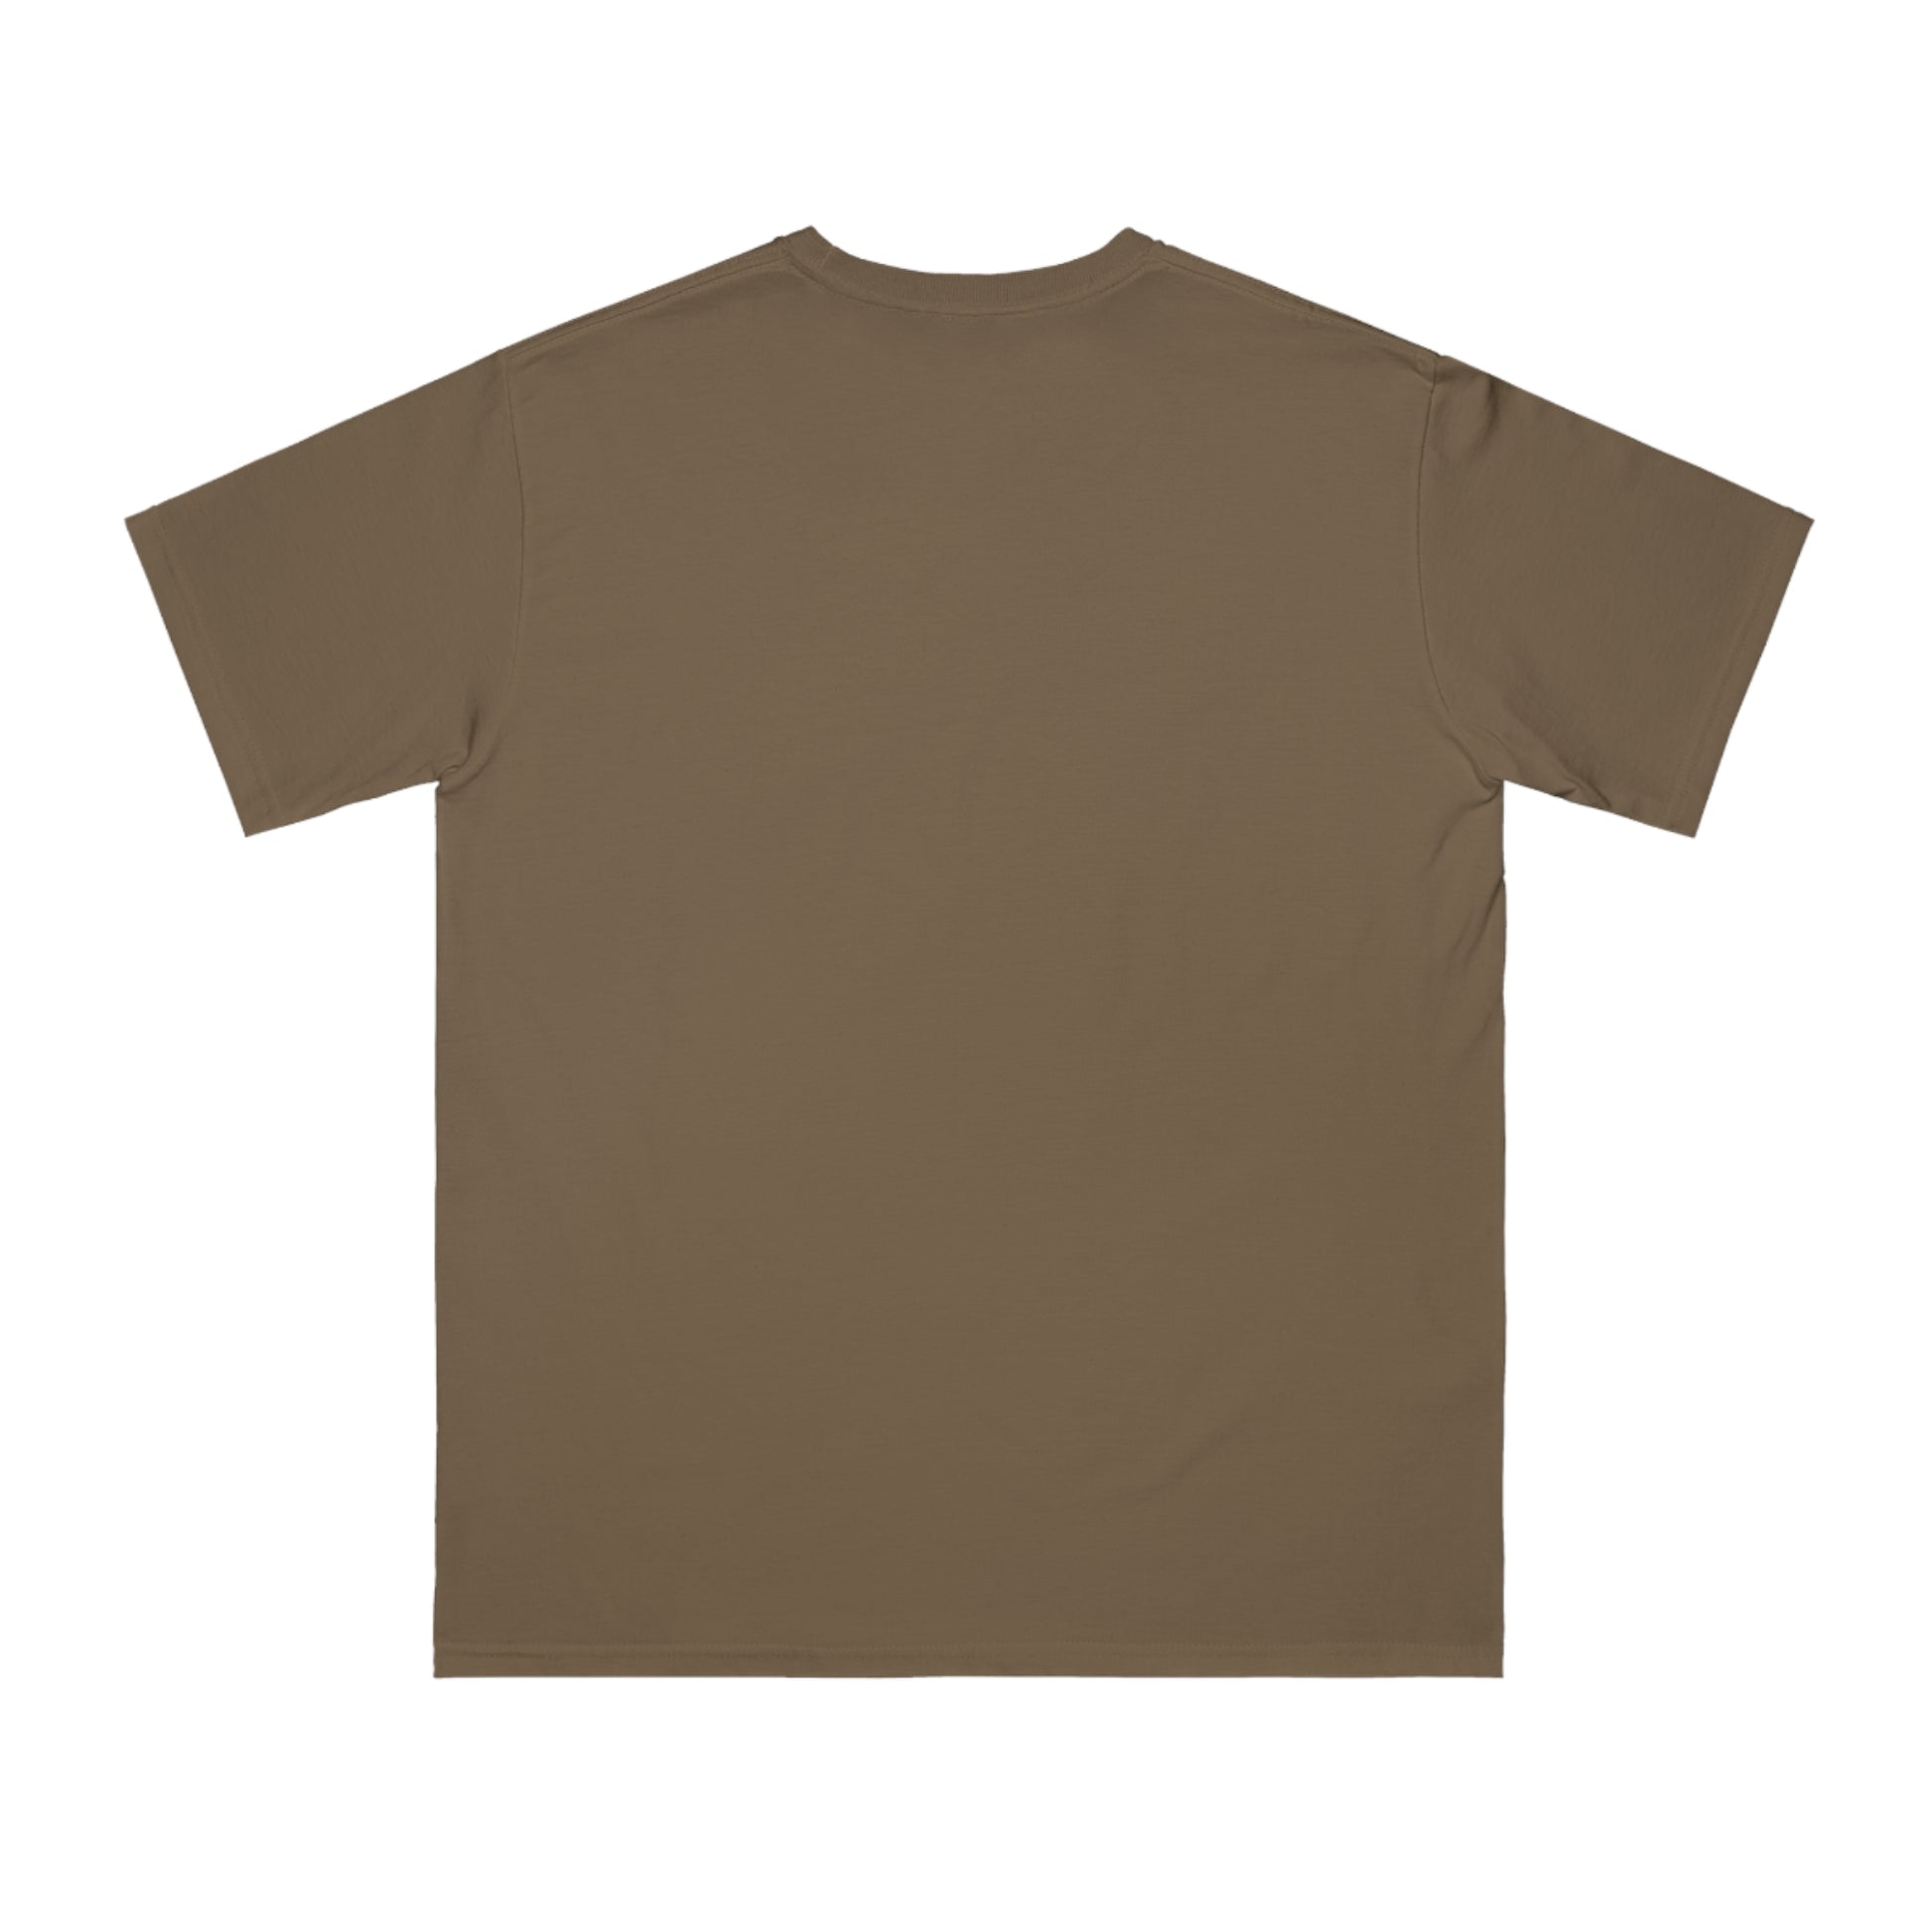 a brown t - shirt on a white background